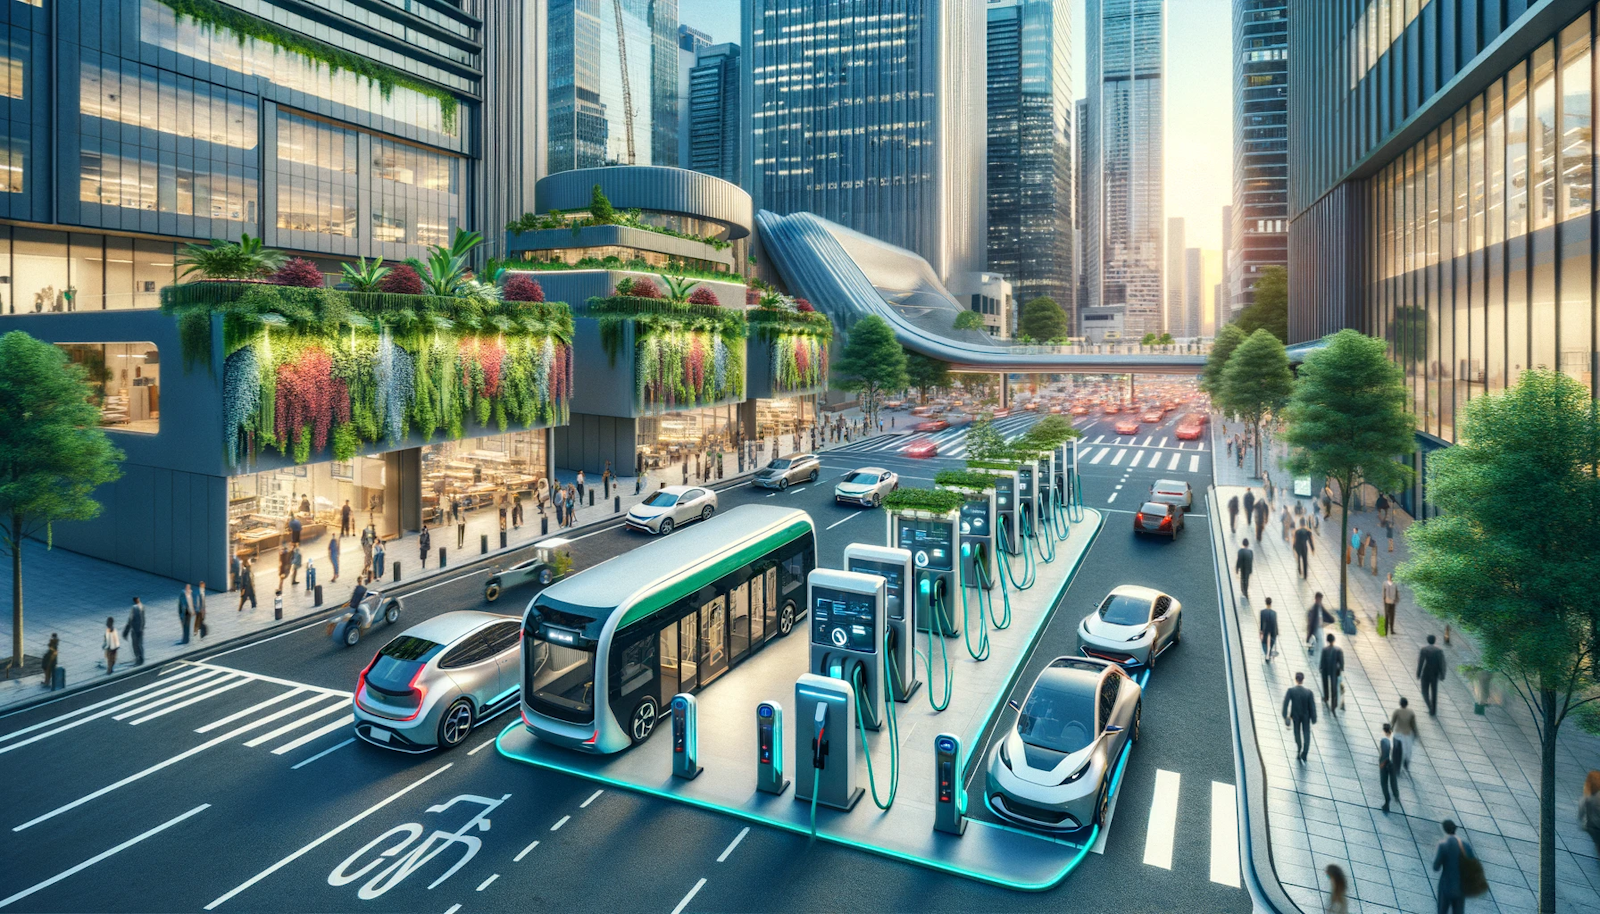 Electric vehicle charging station in a busy city square with skyscrapers, featuring electric cars and a bus, enhanced by urban greenery, showcasing sustainable urban transportation.